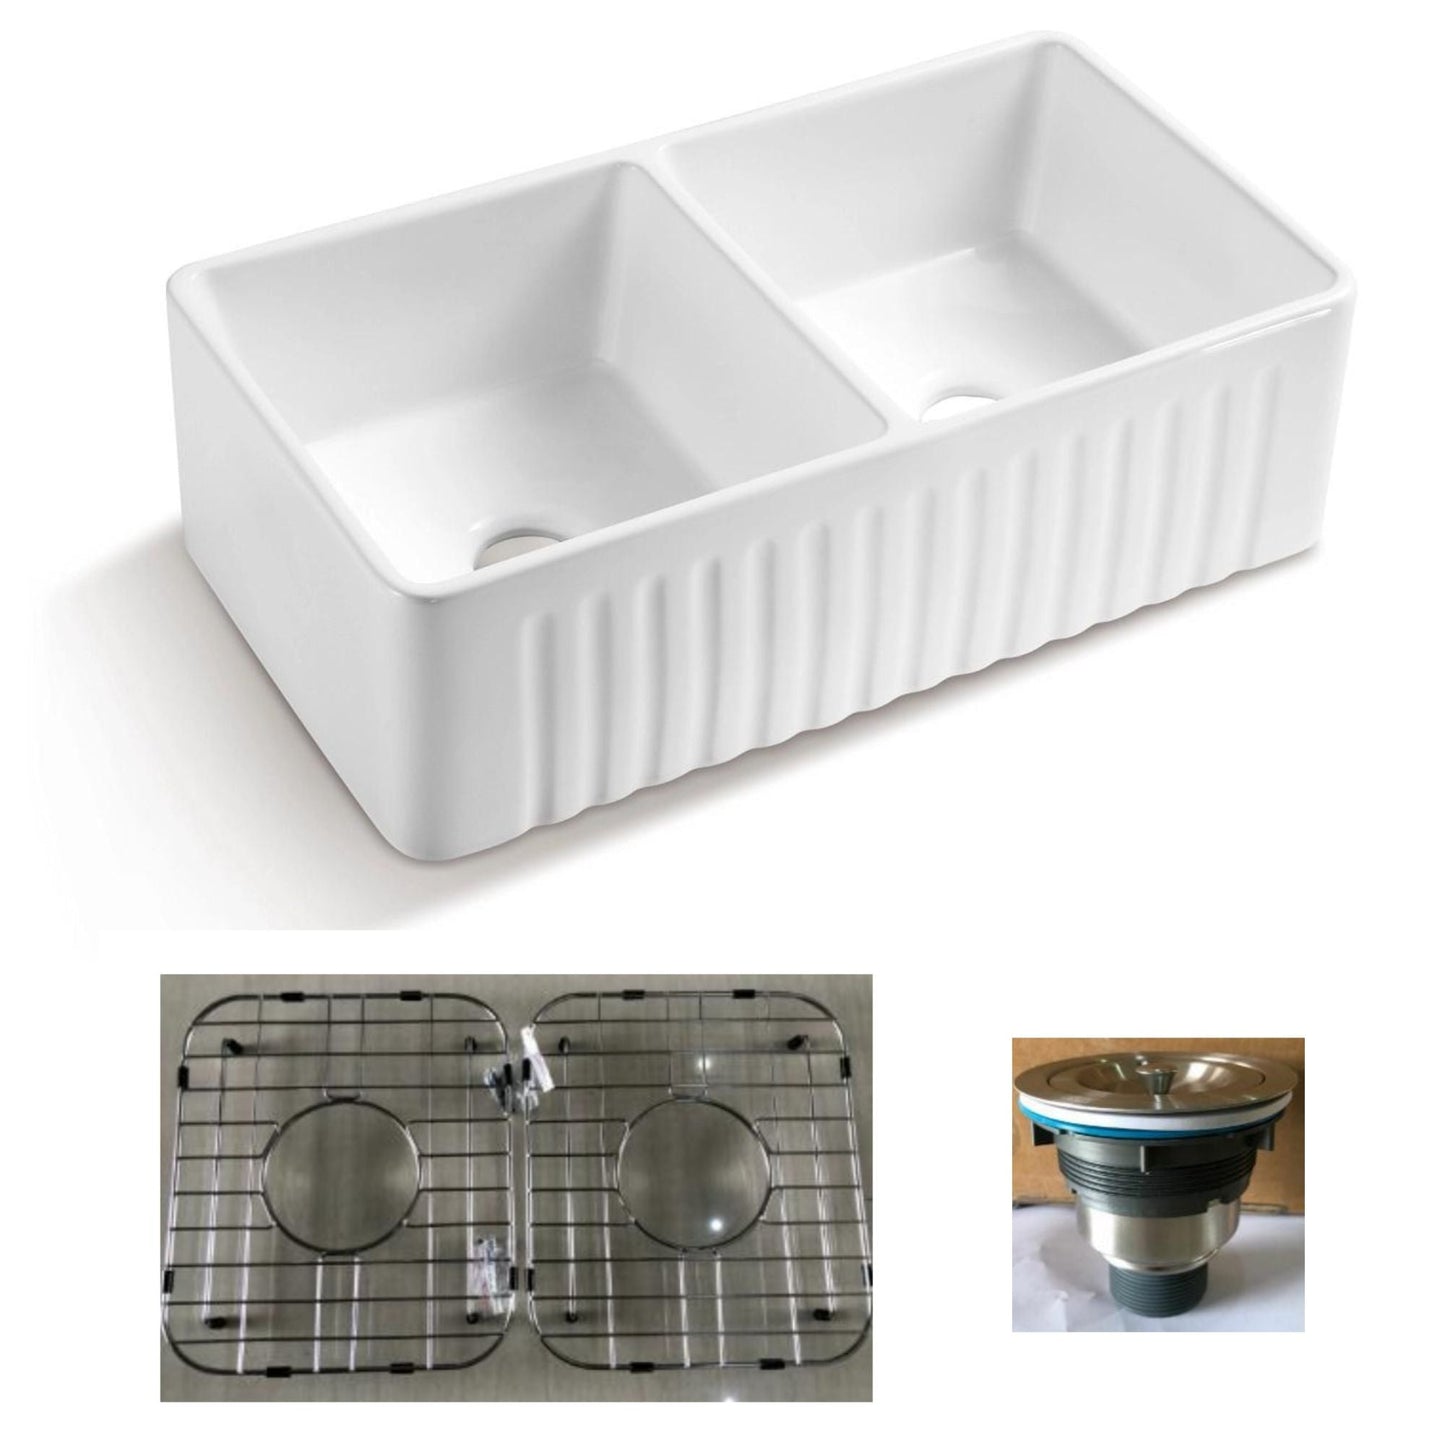 Crestone 33" x 19" Double Bowl Porcelain Kitchen Farmhouse Sink With Stainless Steel Grids and Basket Strainer